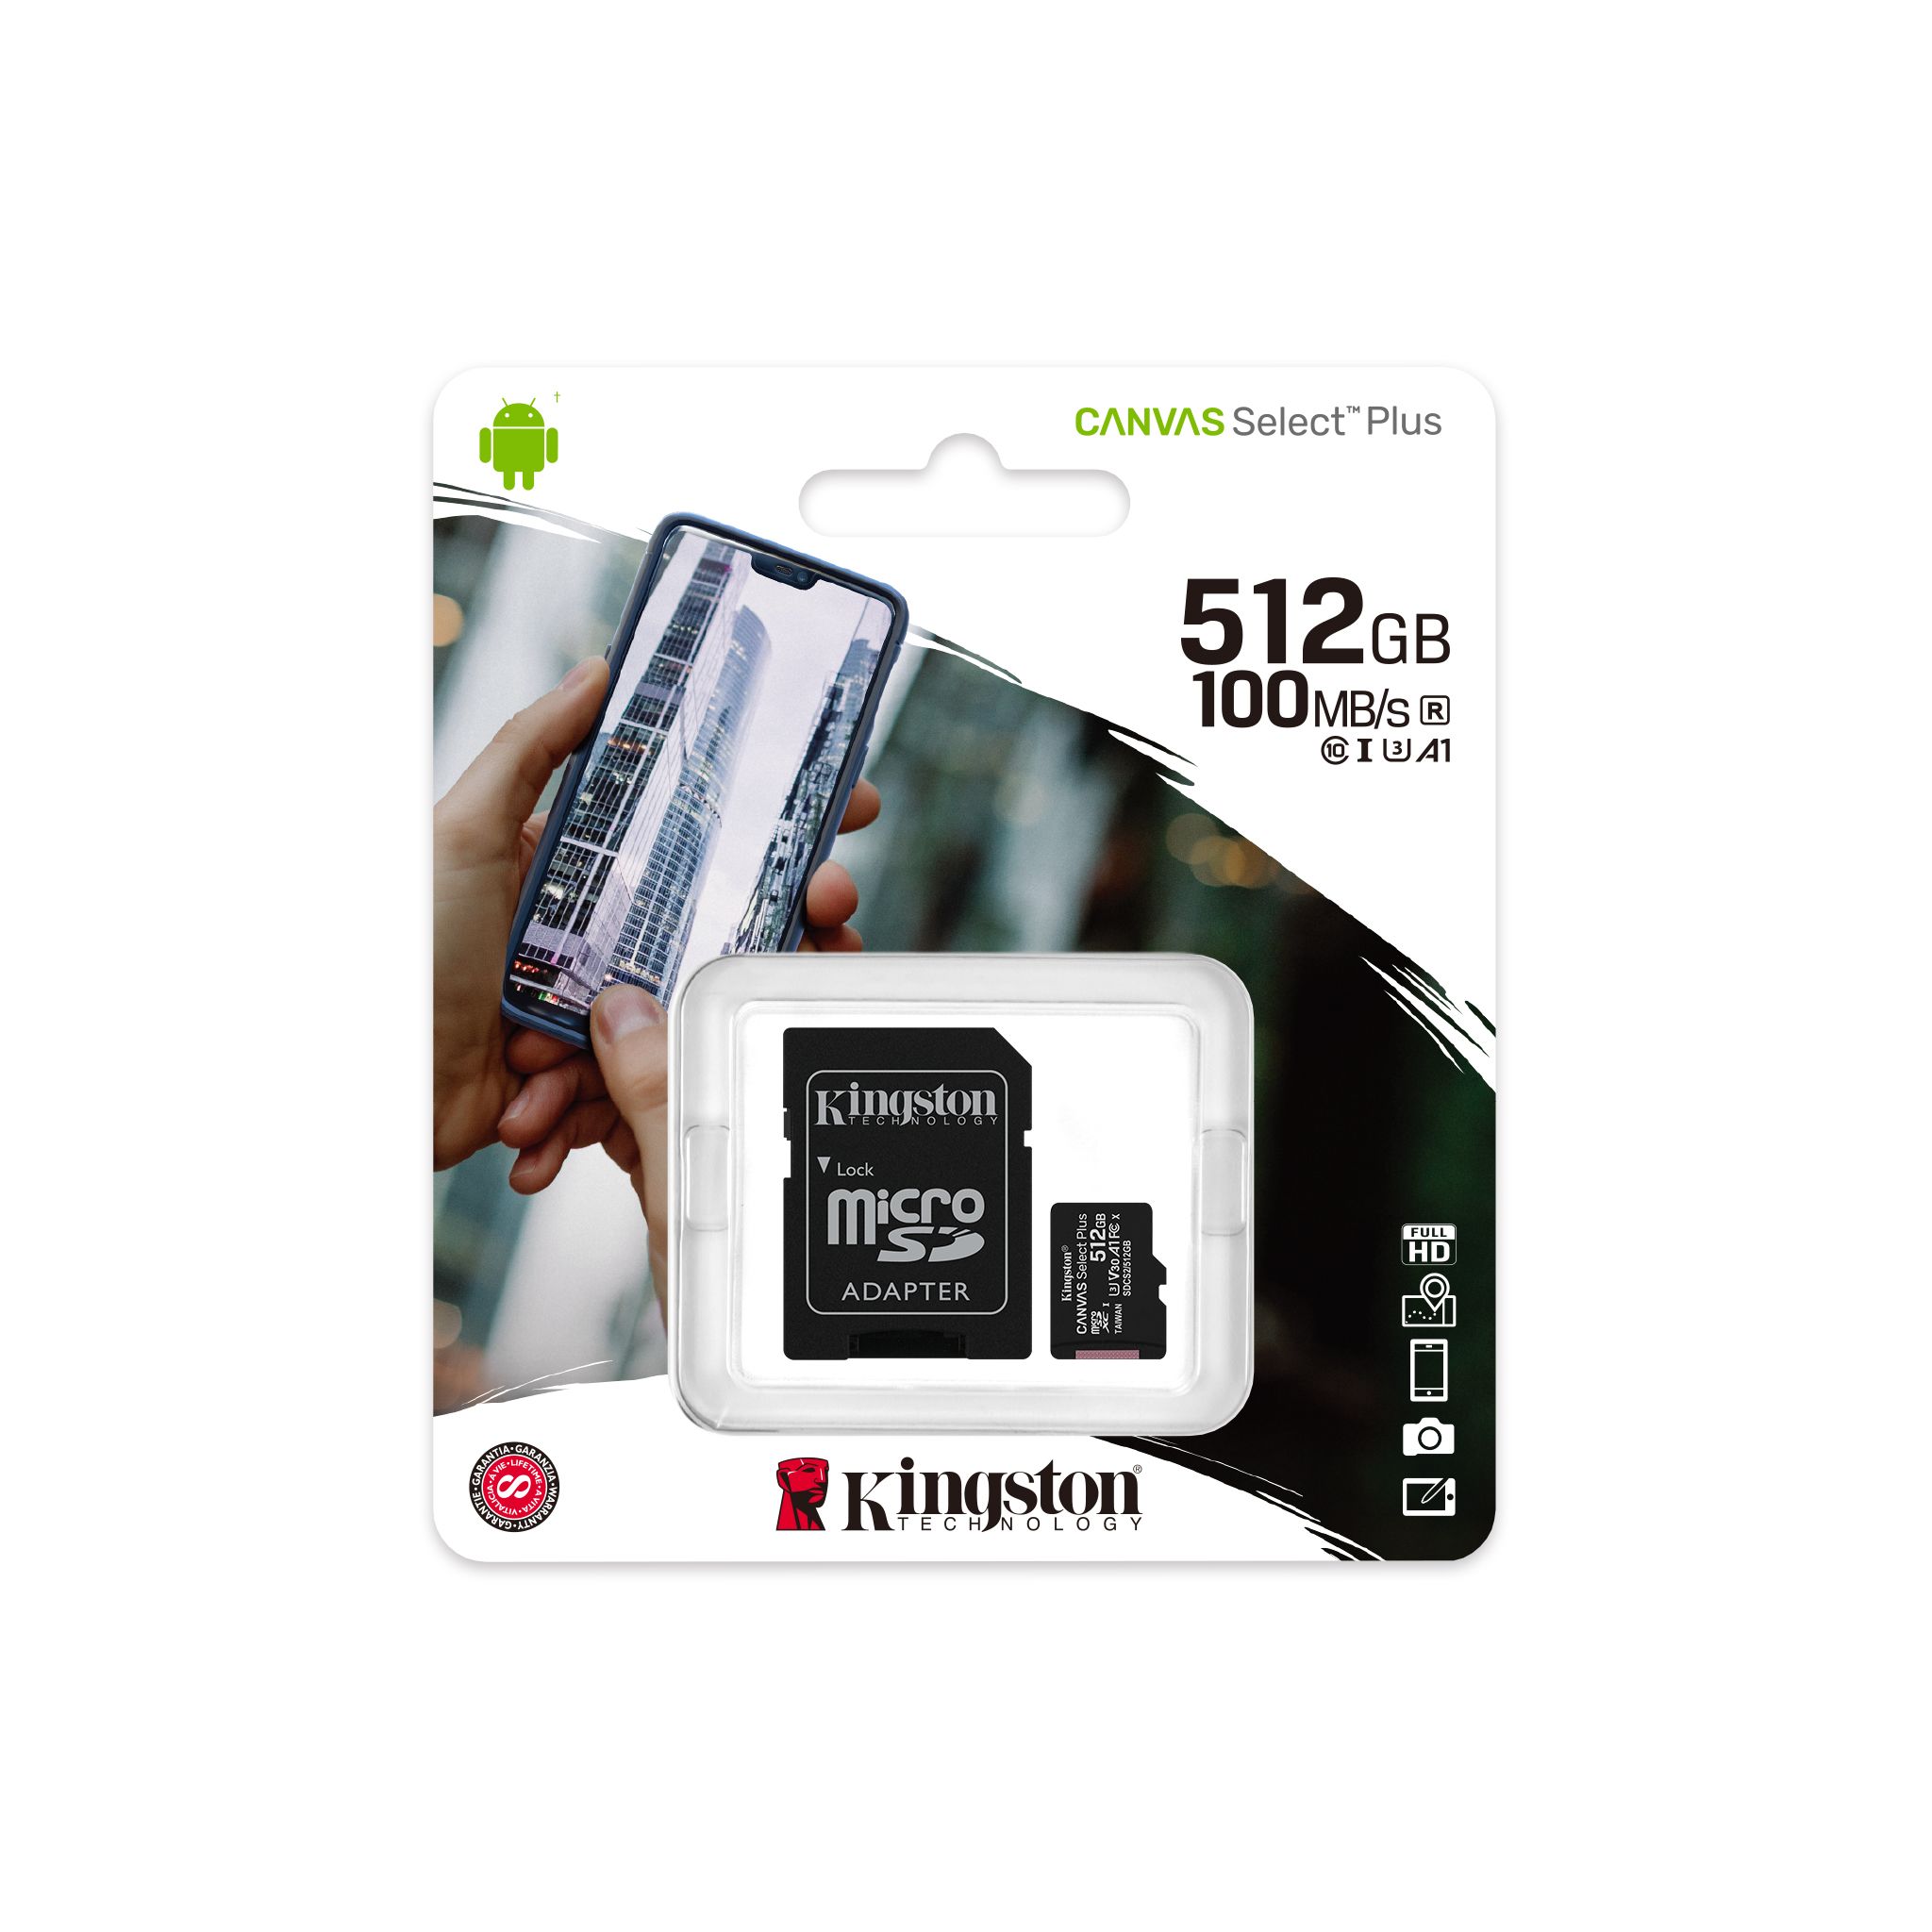 100MBs Works with Kingston Kingston 512GB Acer S56 MicroSDXC Canvas Select Plus Card Verified by SanFlash. 